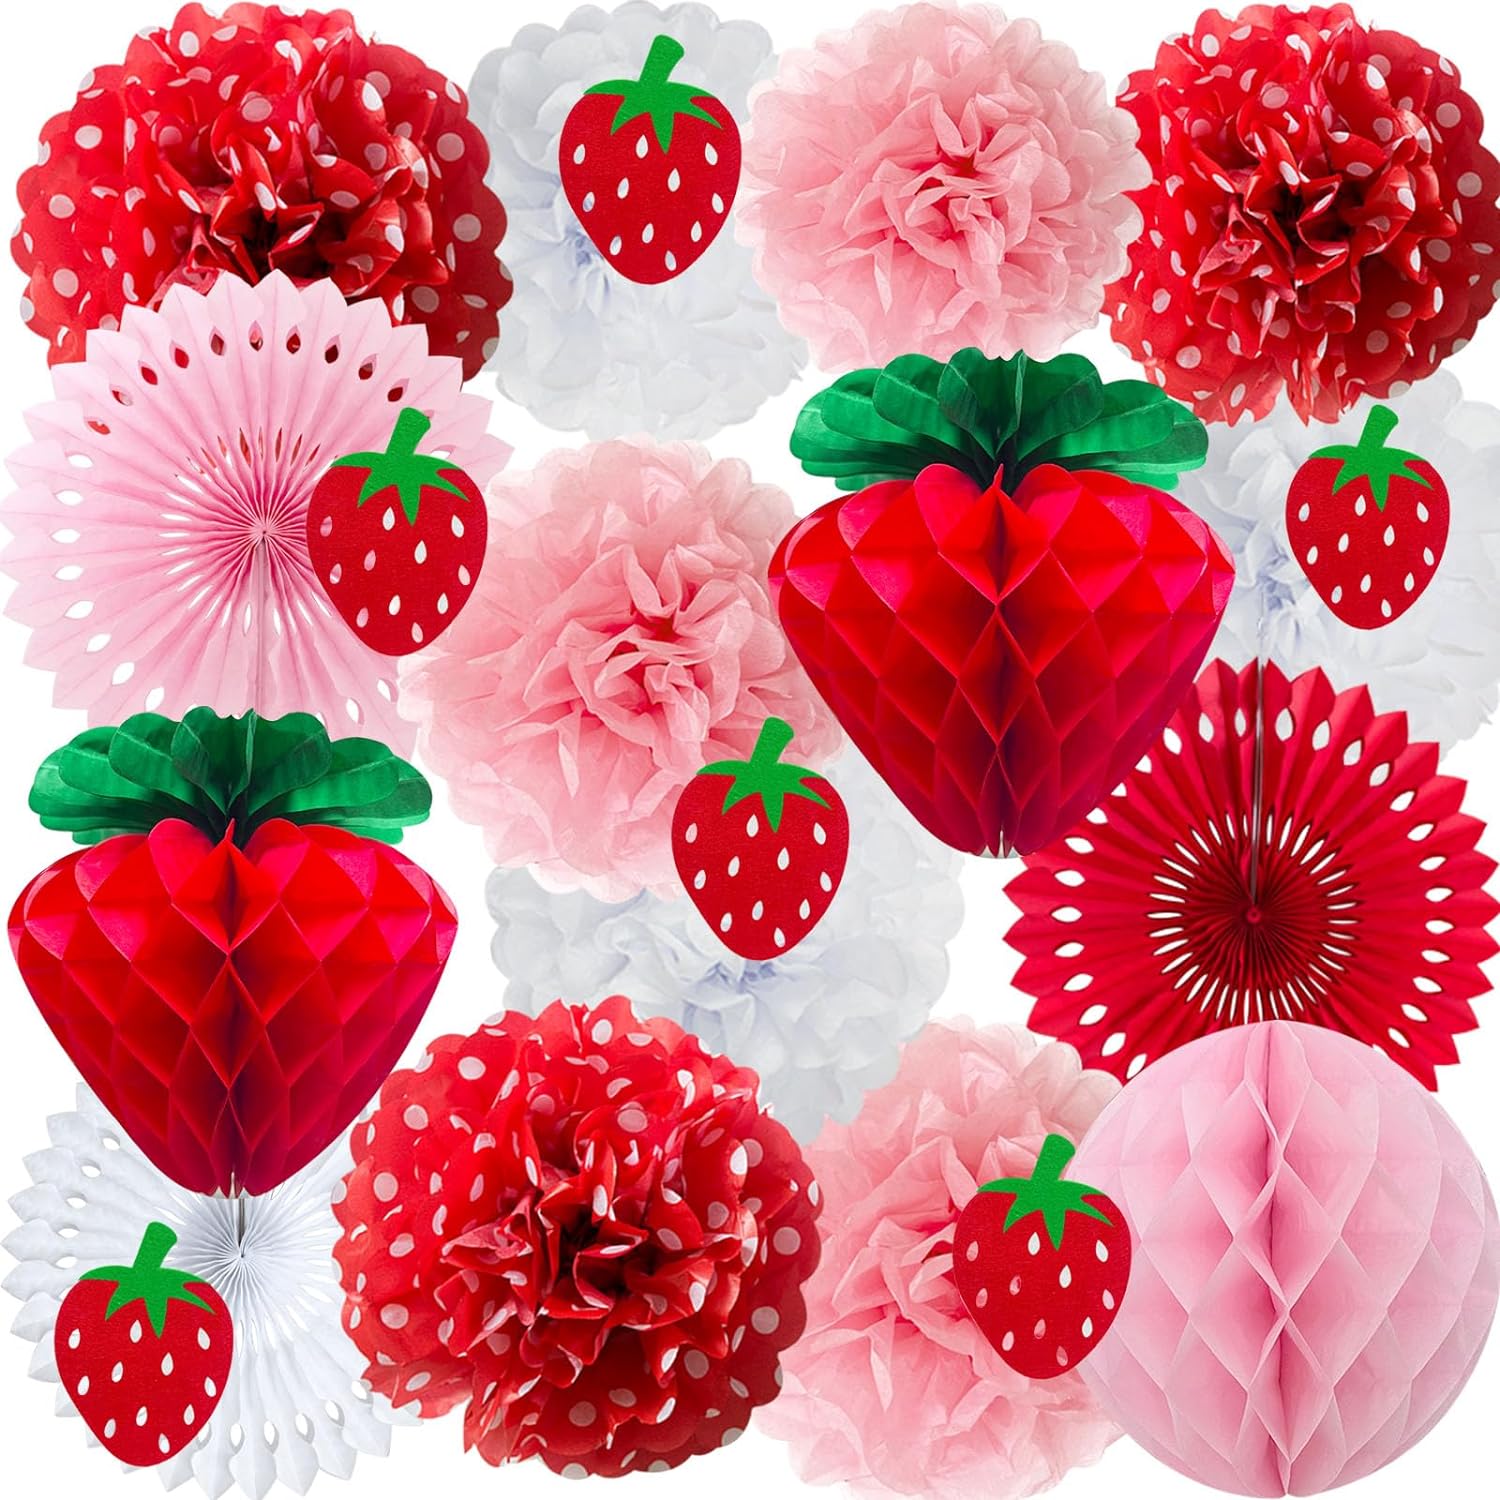 Bulk Strawberry Party Decoration Set Red Pink White Tissue Pom Poms Fans Honeycomb Balls Lanterns Garland Ideal for Classroom Sweet themed Bridal Baby Shower Girls' Party Decor Wholesale